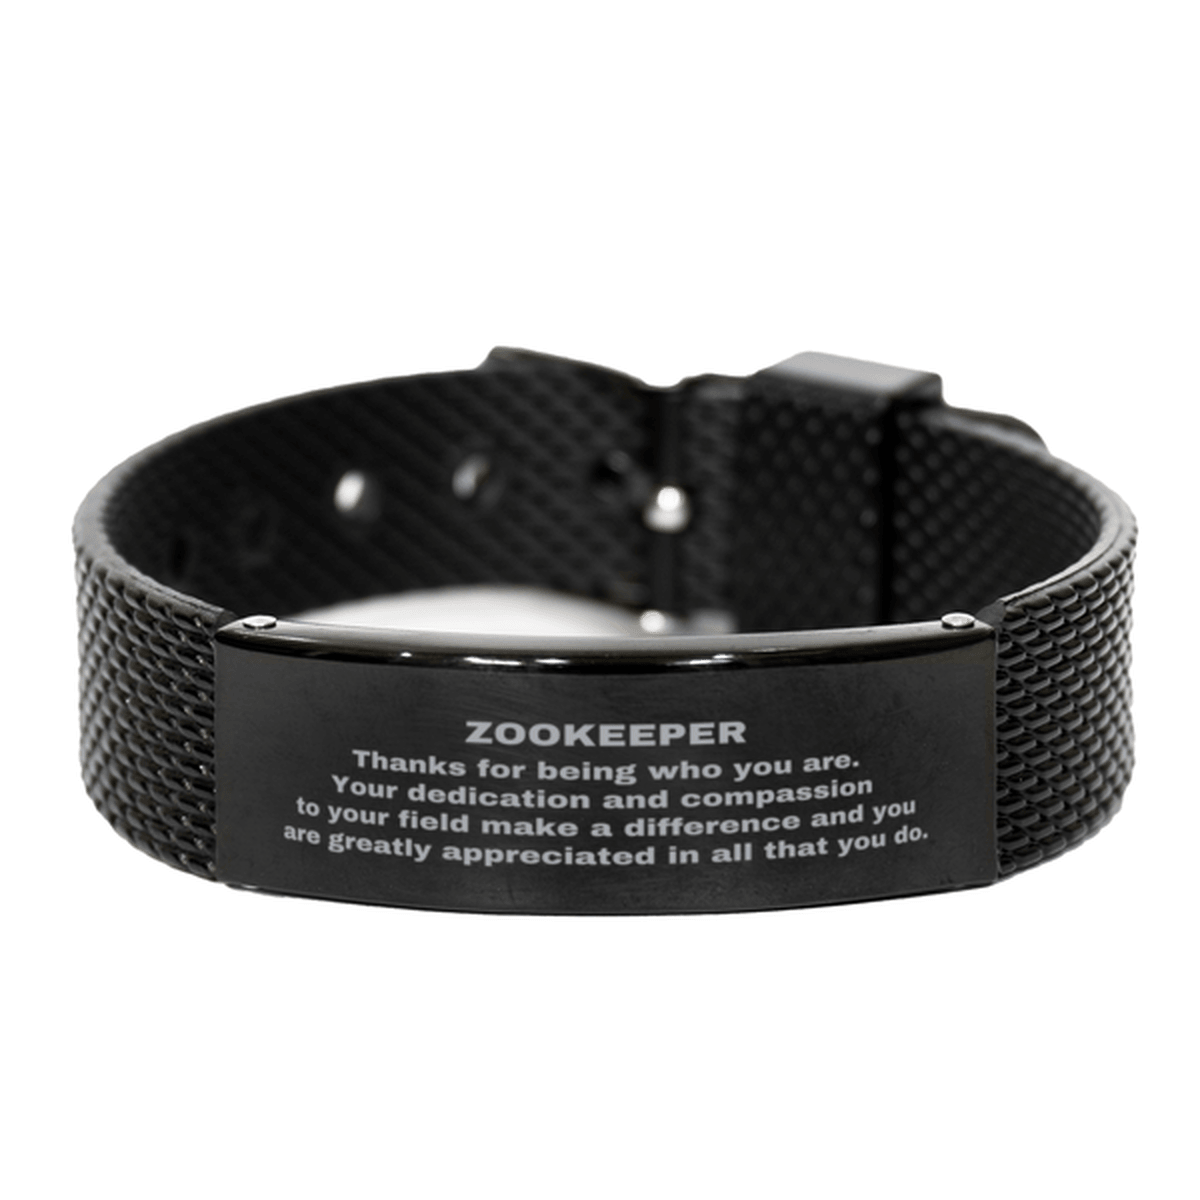 Zookeeper Black Shark Mesh Stainless Steel Engraved Bracelet - Thanks for being who you are - Birthday Christmas Jewelry Gifts Coworkers Colleague Boss - Mallard Moon Gift Shop